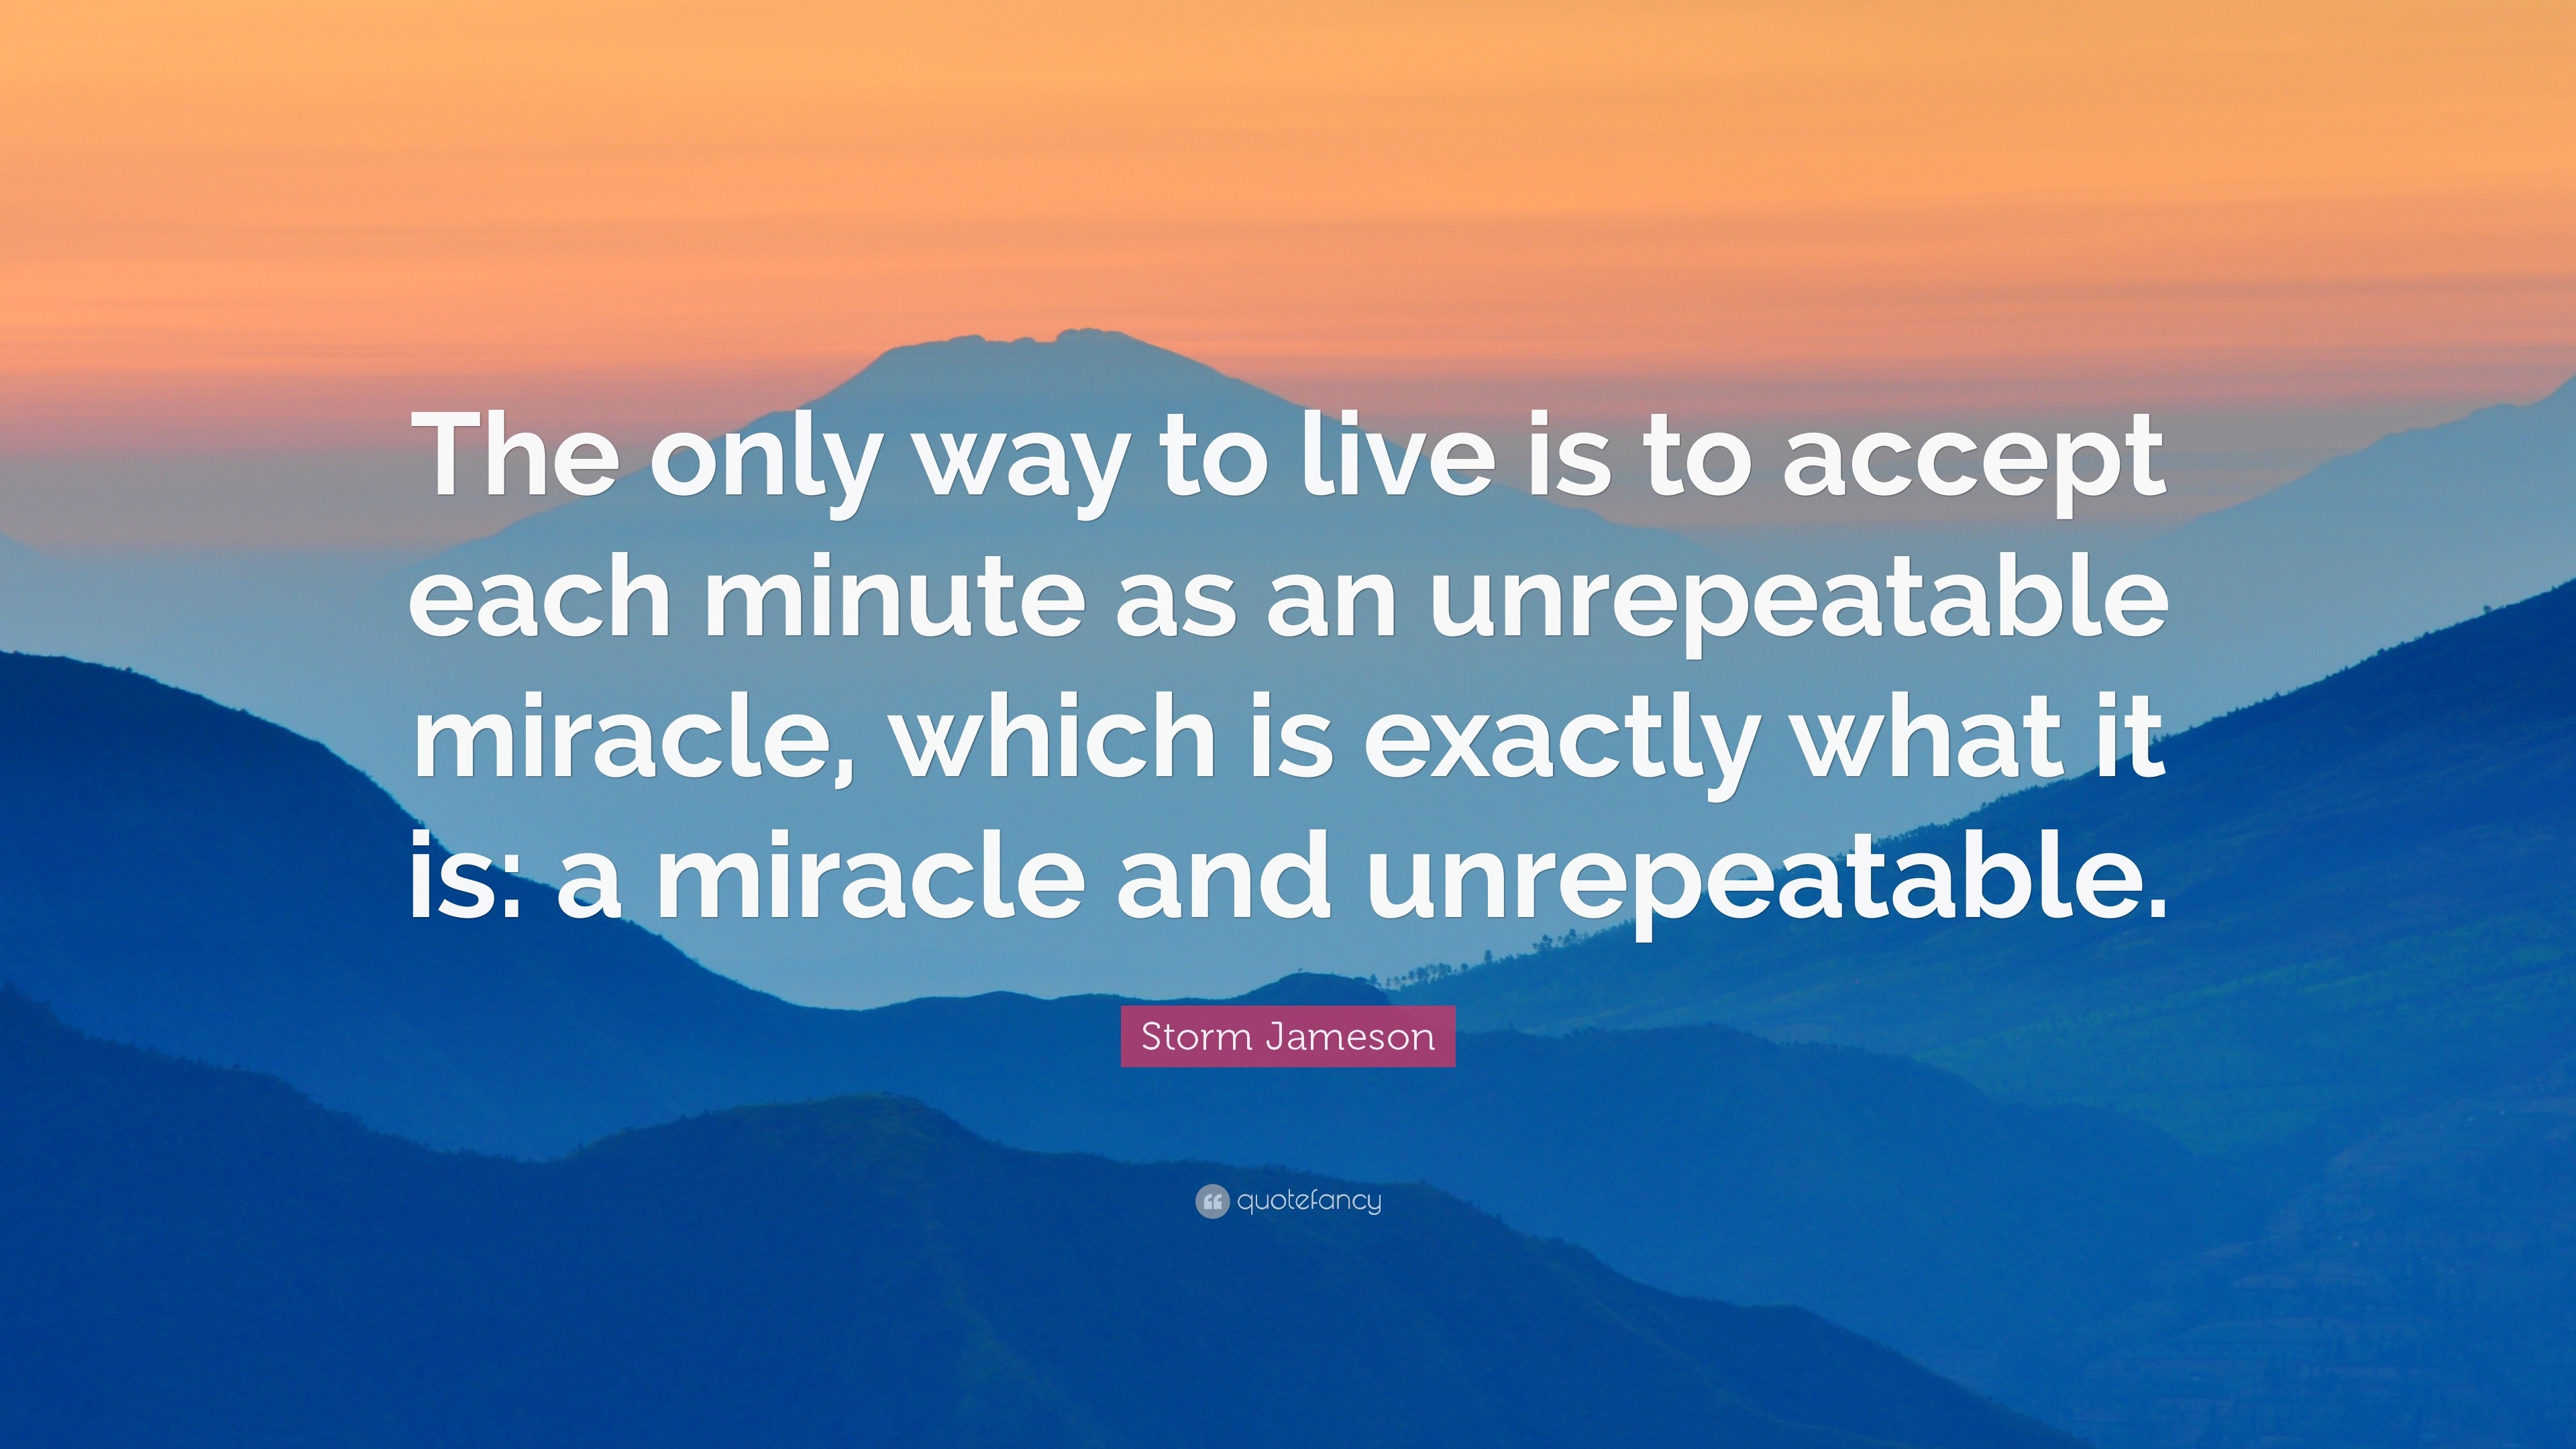 Storm Jameson Quote: “The only way to live is to accept each minute as ...